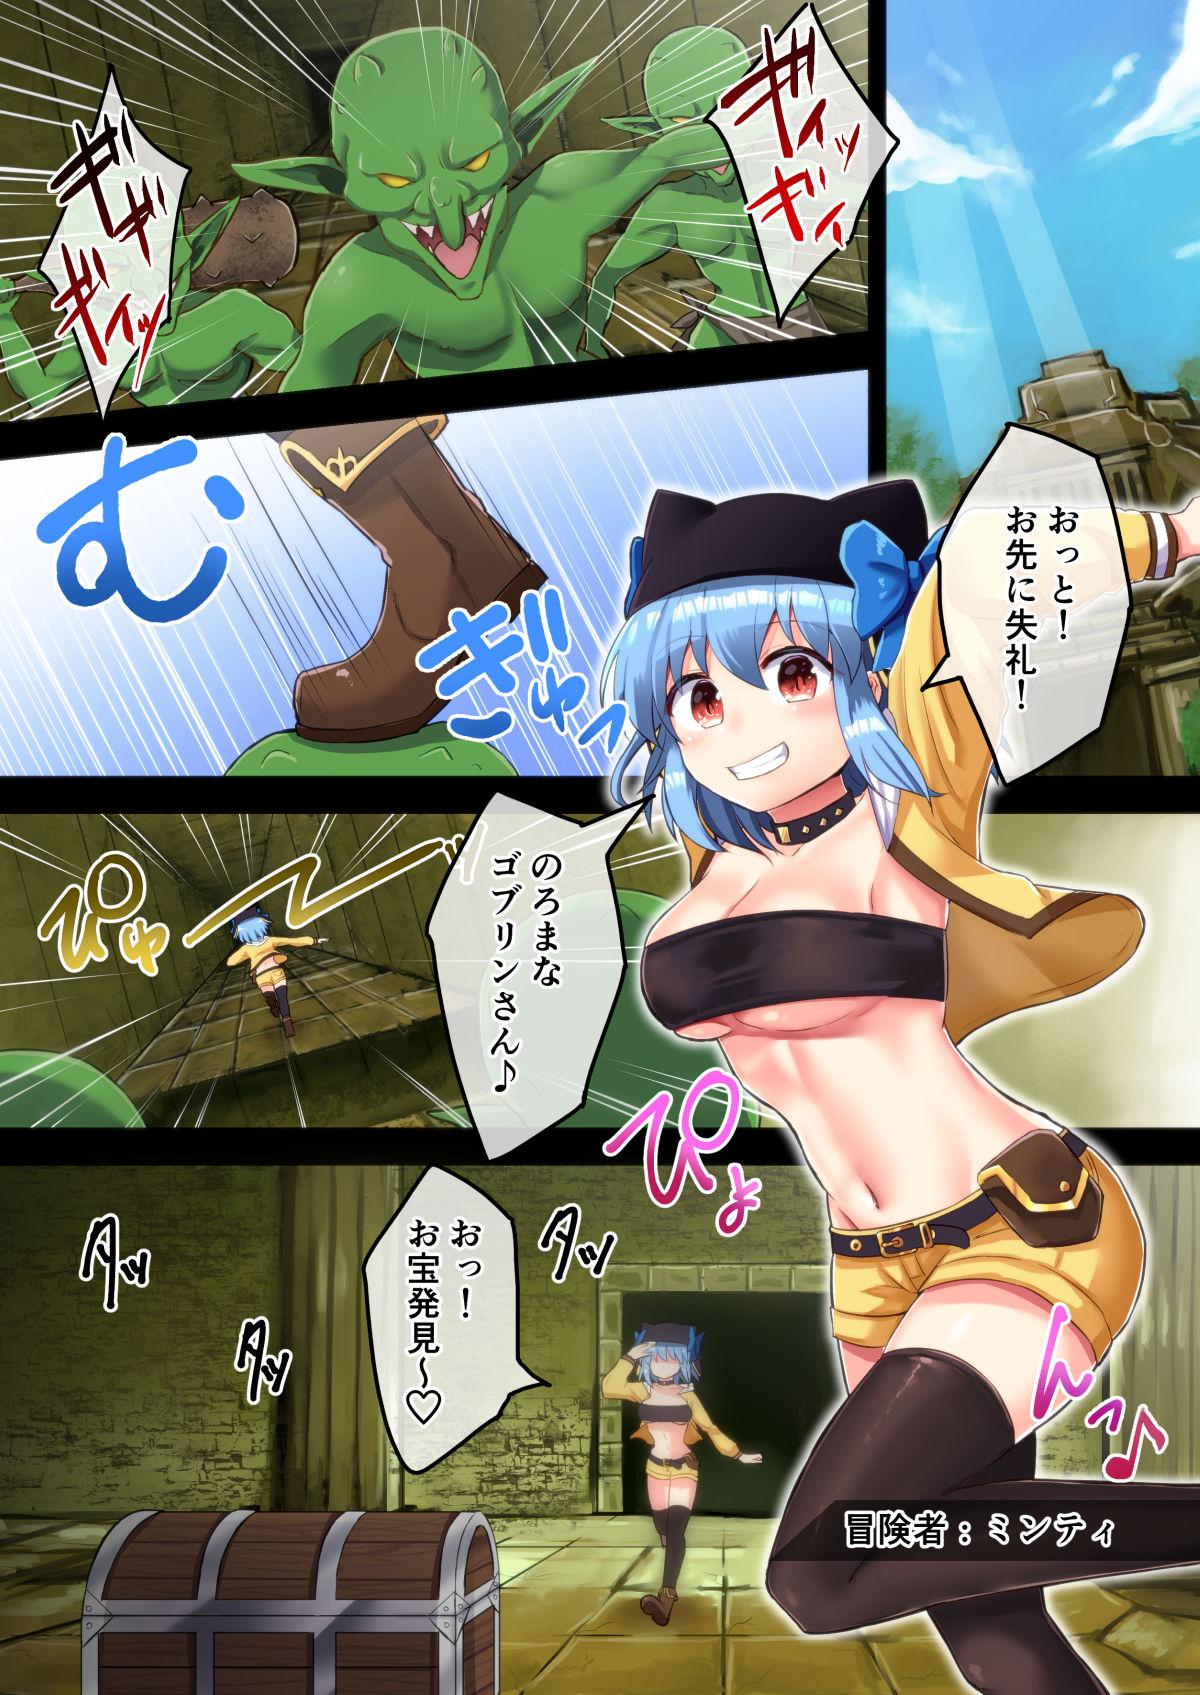 Pussy Licking Kyousei Soubi!? Ero Trap Dungeon Gemendo - Page 2